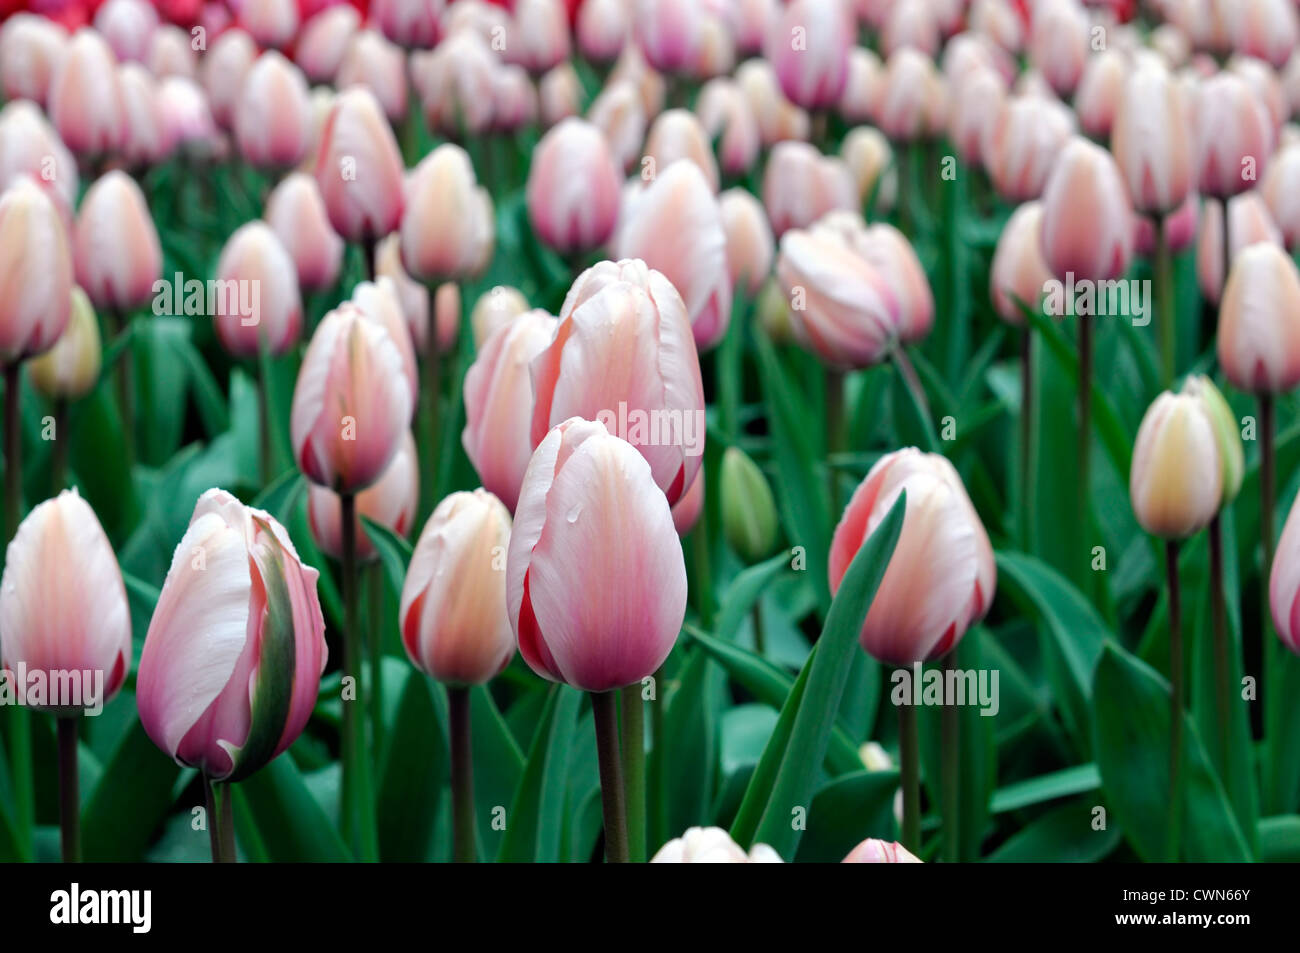 Tulipa salmon impression darwin hybrid pale pink tulip garden flowers spring flower bloom blossom bed colour color Stock Photo